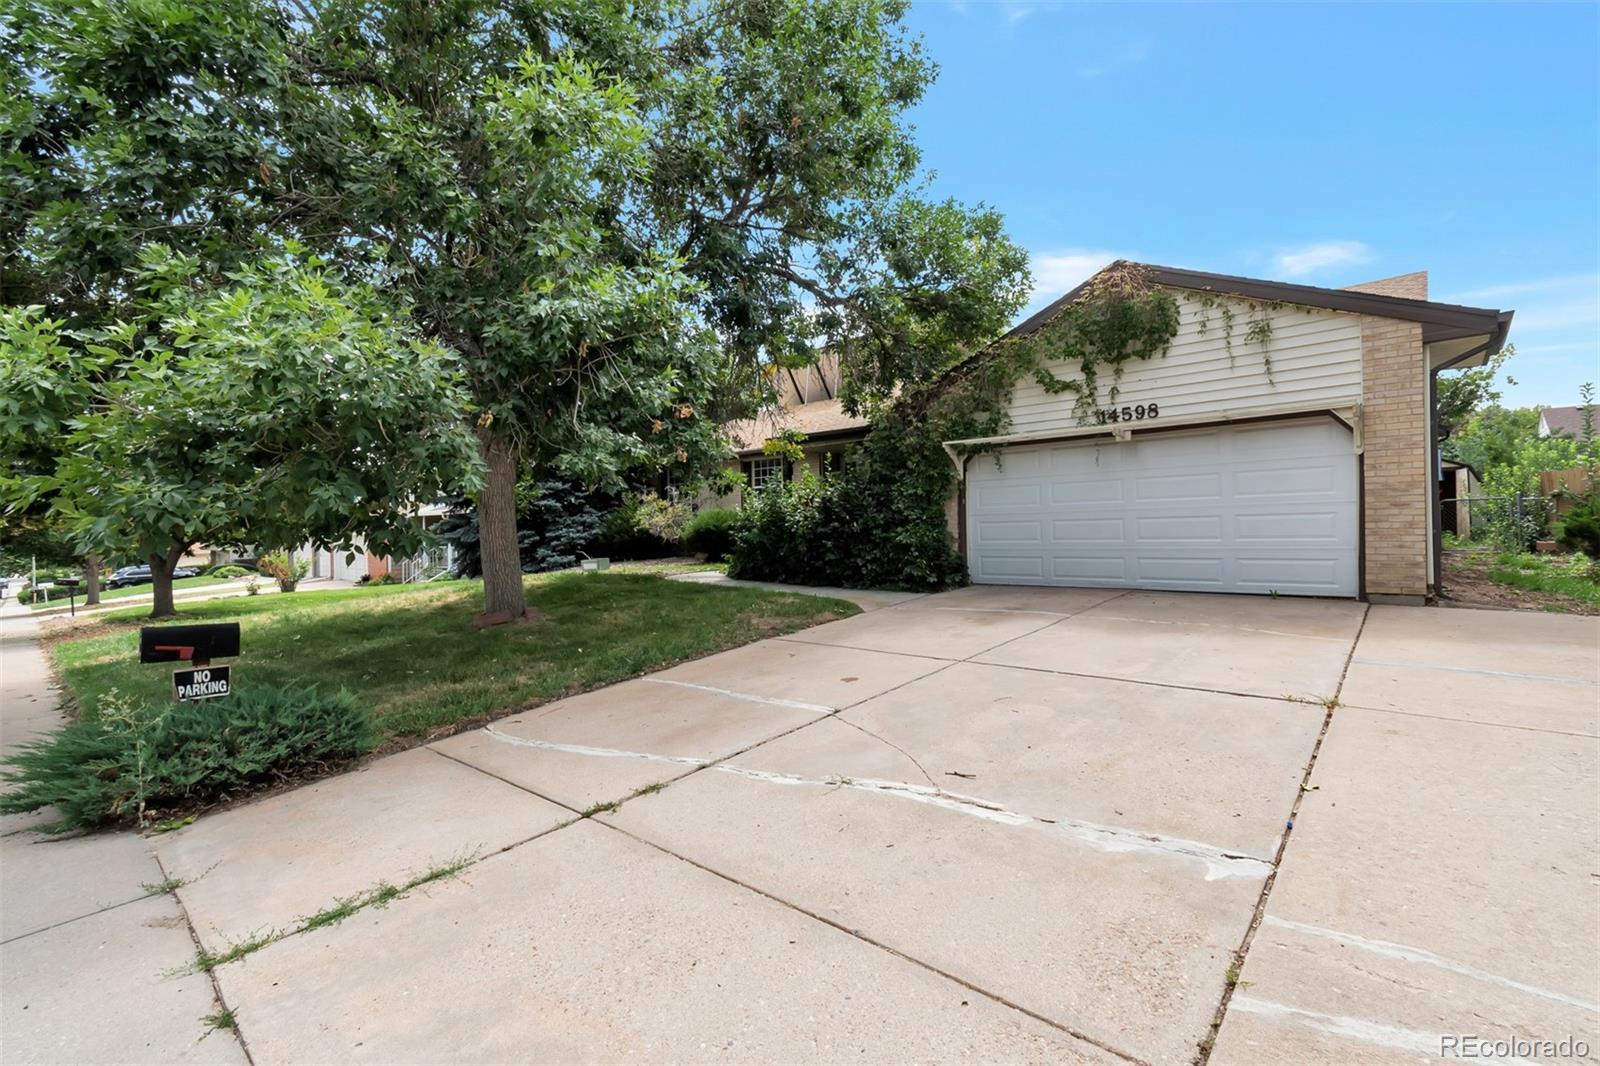 Photo one of 14598 E Evans Ave Aurora CO 80014 | MLS 1785921